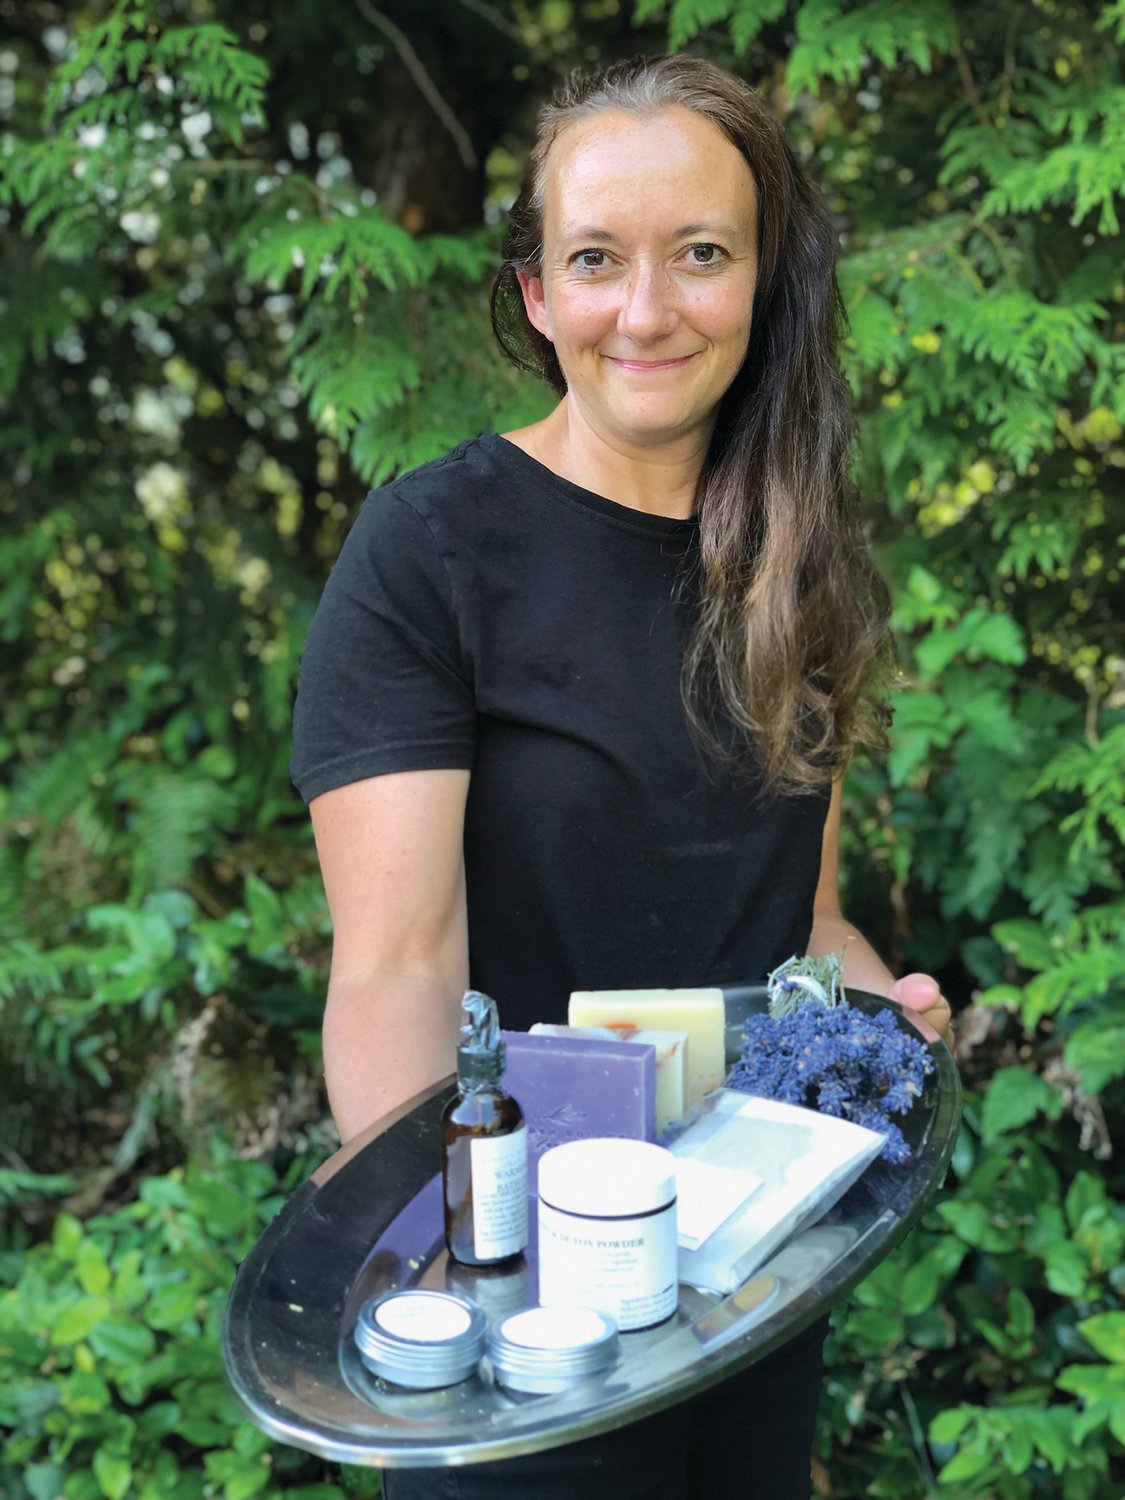 Jeanne Kitchen of Hidden Hollow farm creates natural soaps from wild northwest ingredients on her farm in the Chimacum Valley.